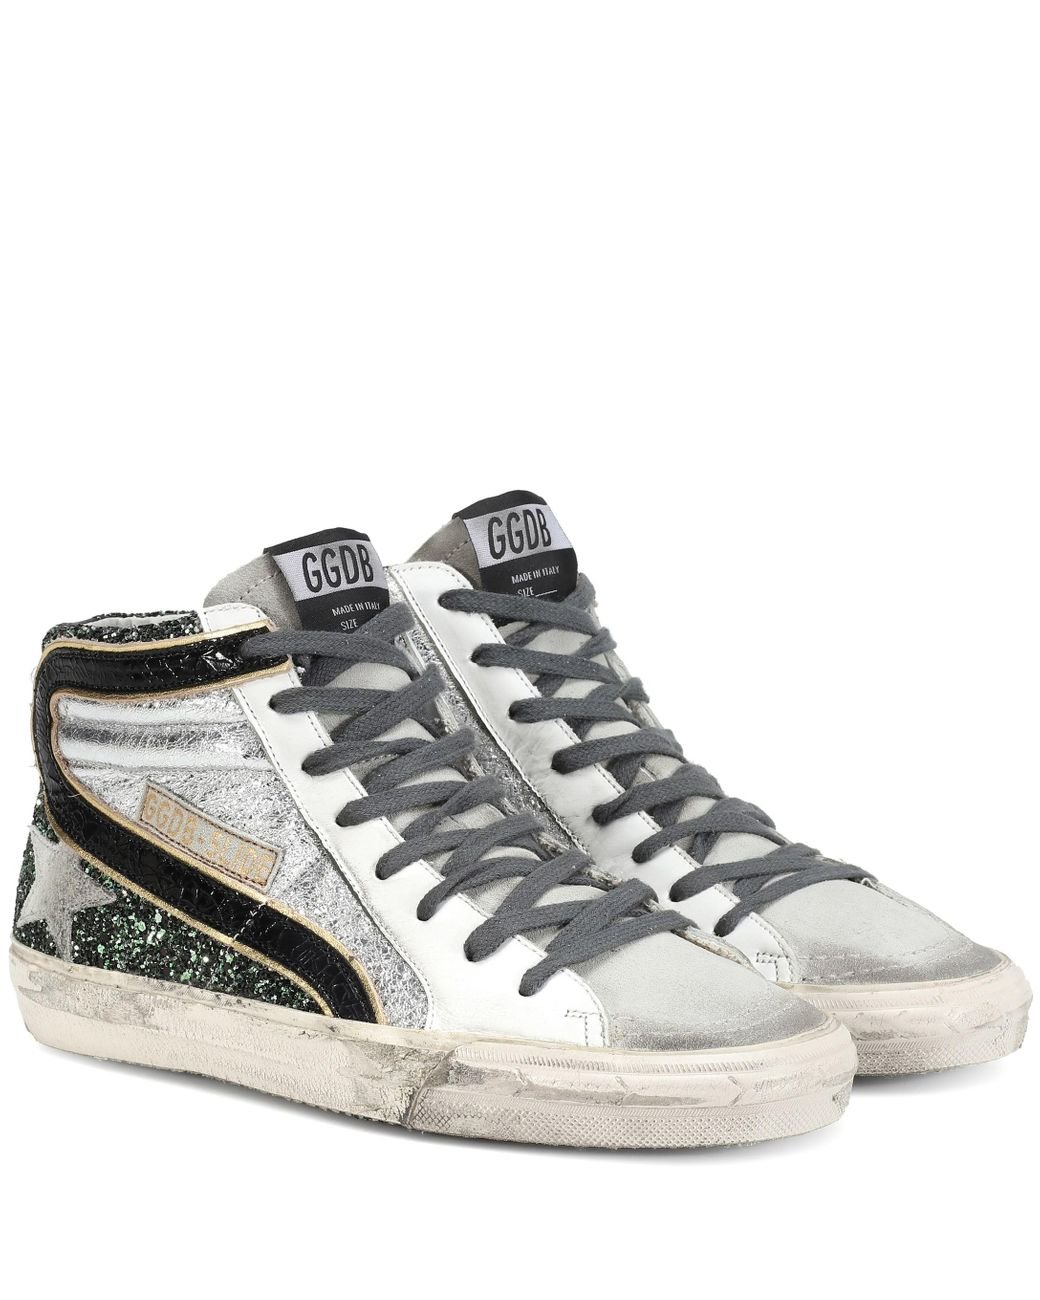 Golden Goose Slide Glitter And Leather Sneakers in Metallic | Lyst